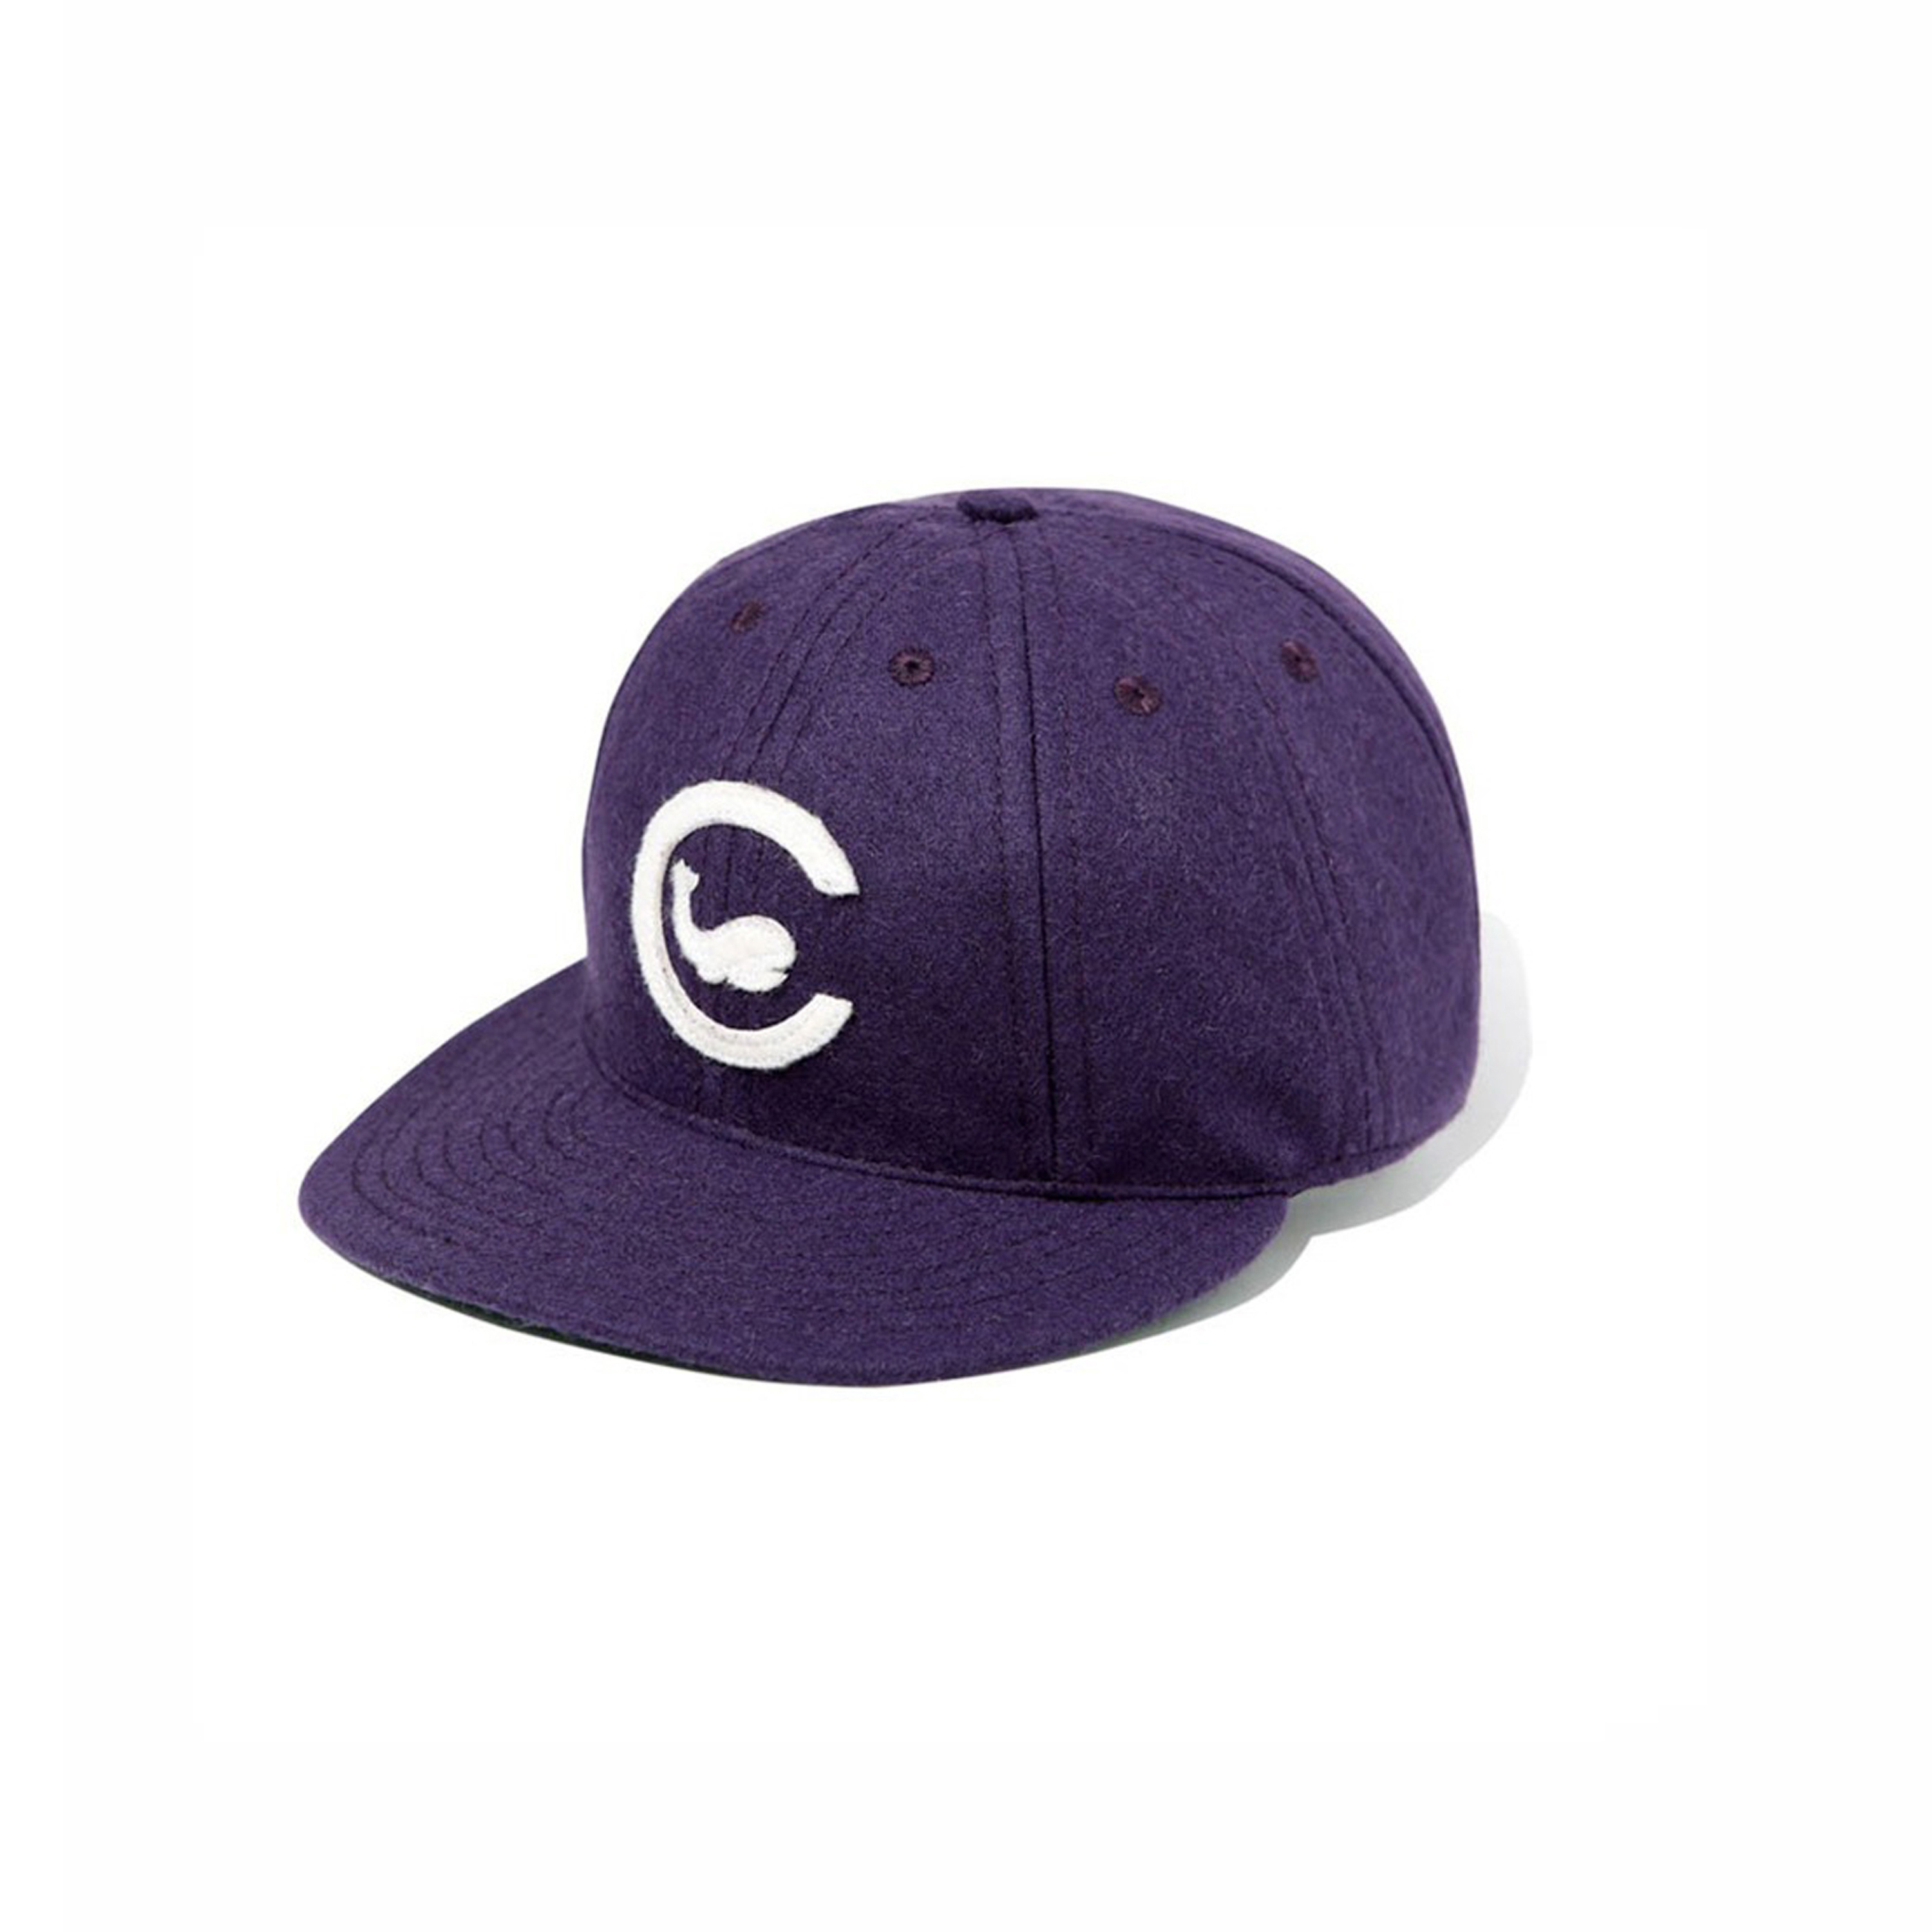 CHICAGO WHALES 1915(WOOL) 8-PANEL - PURPLE